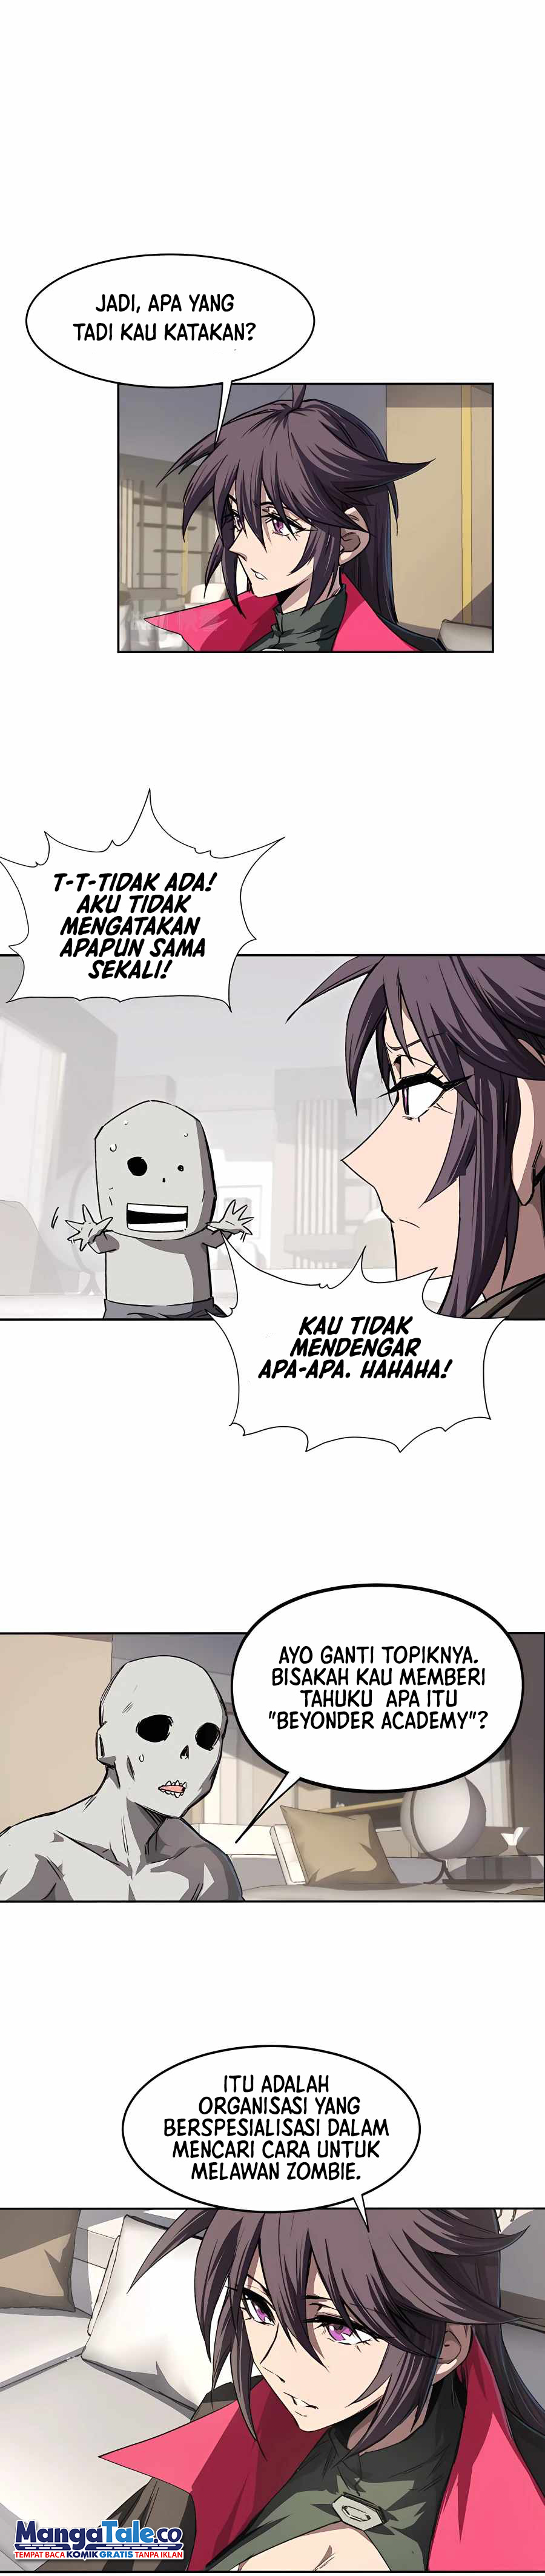 Mr. Zombie Chapter 08 - 101